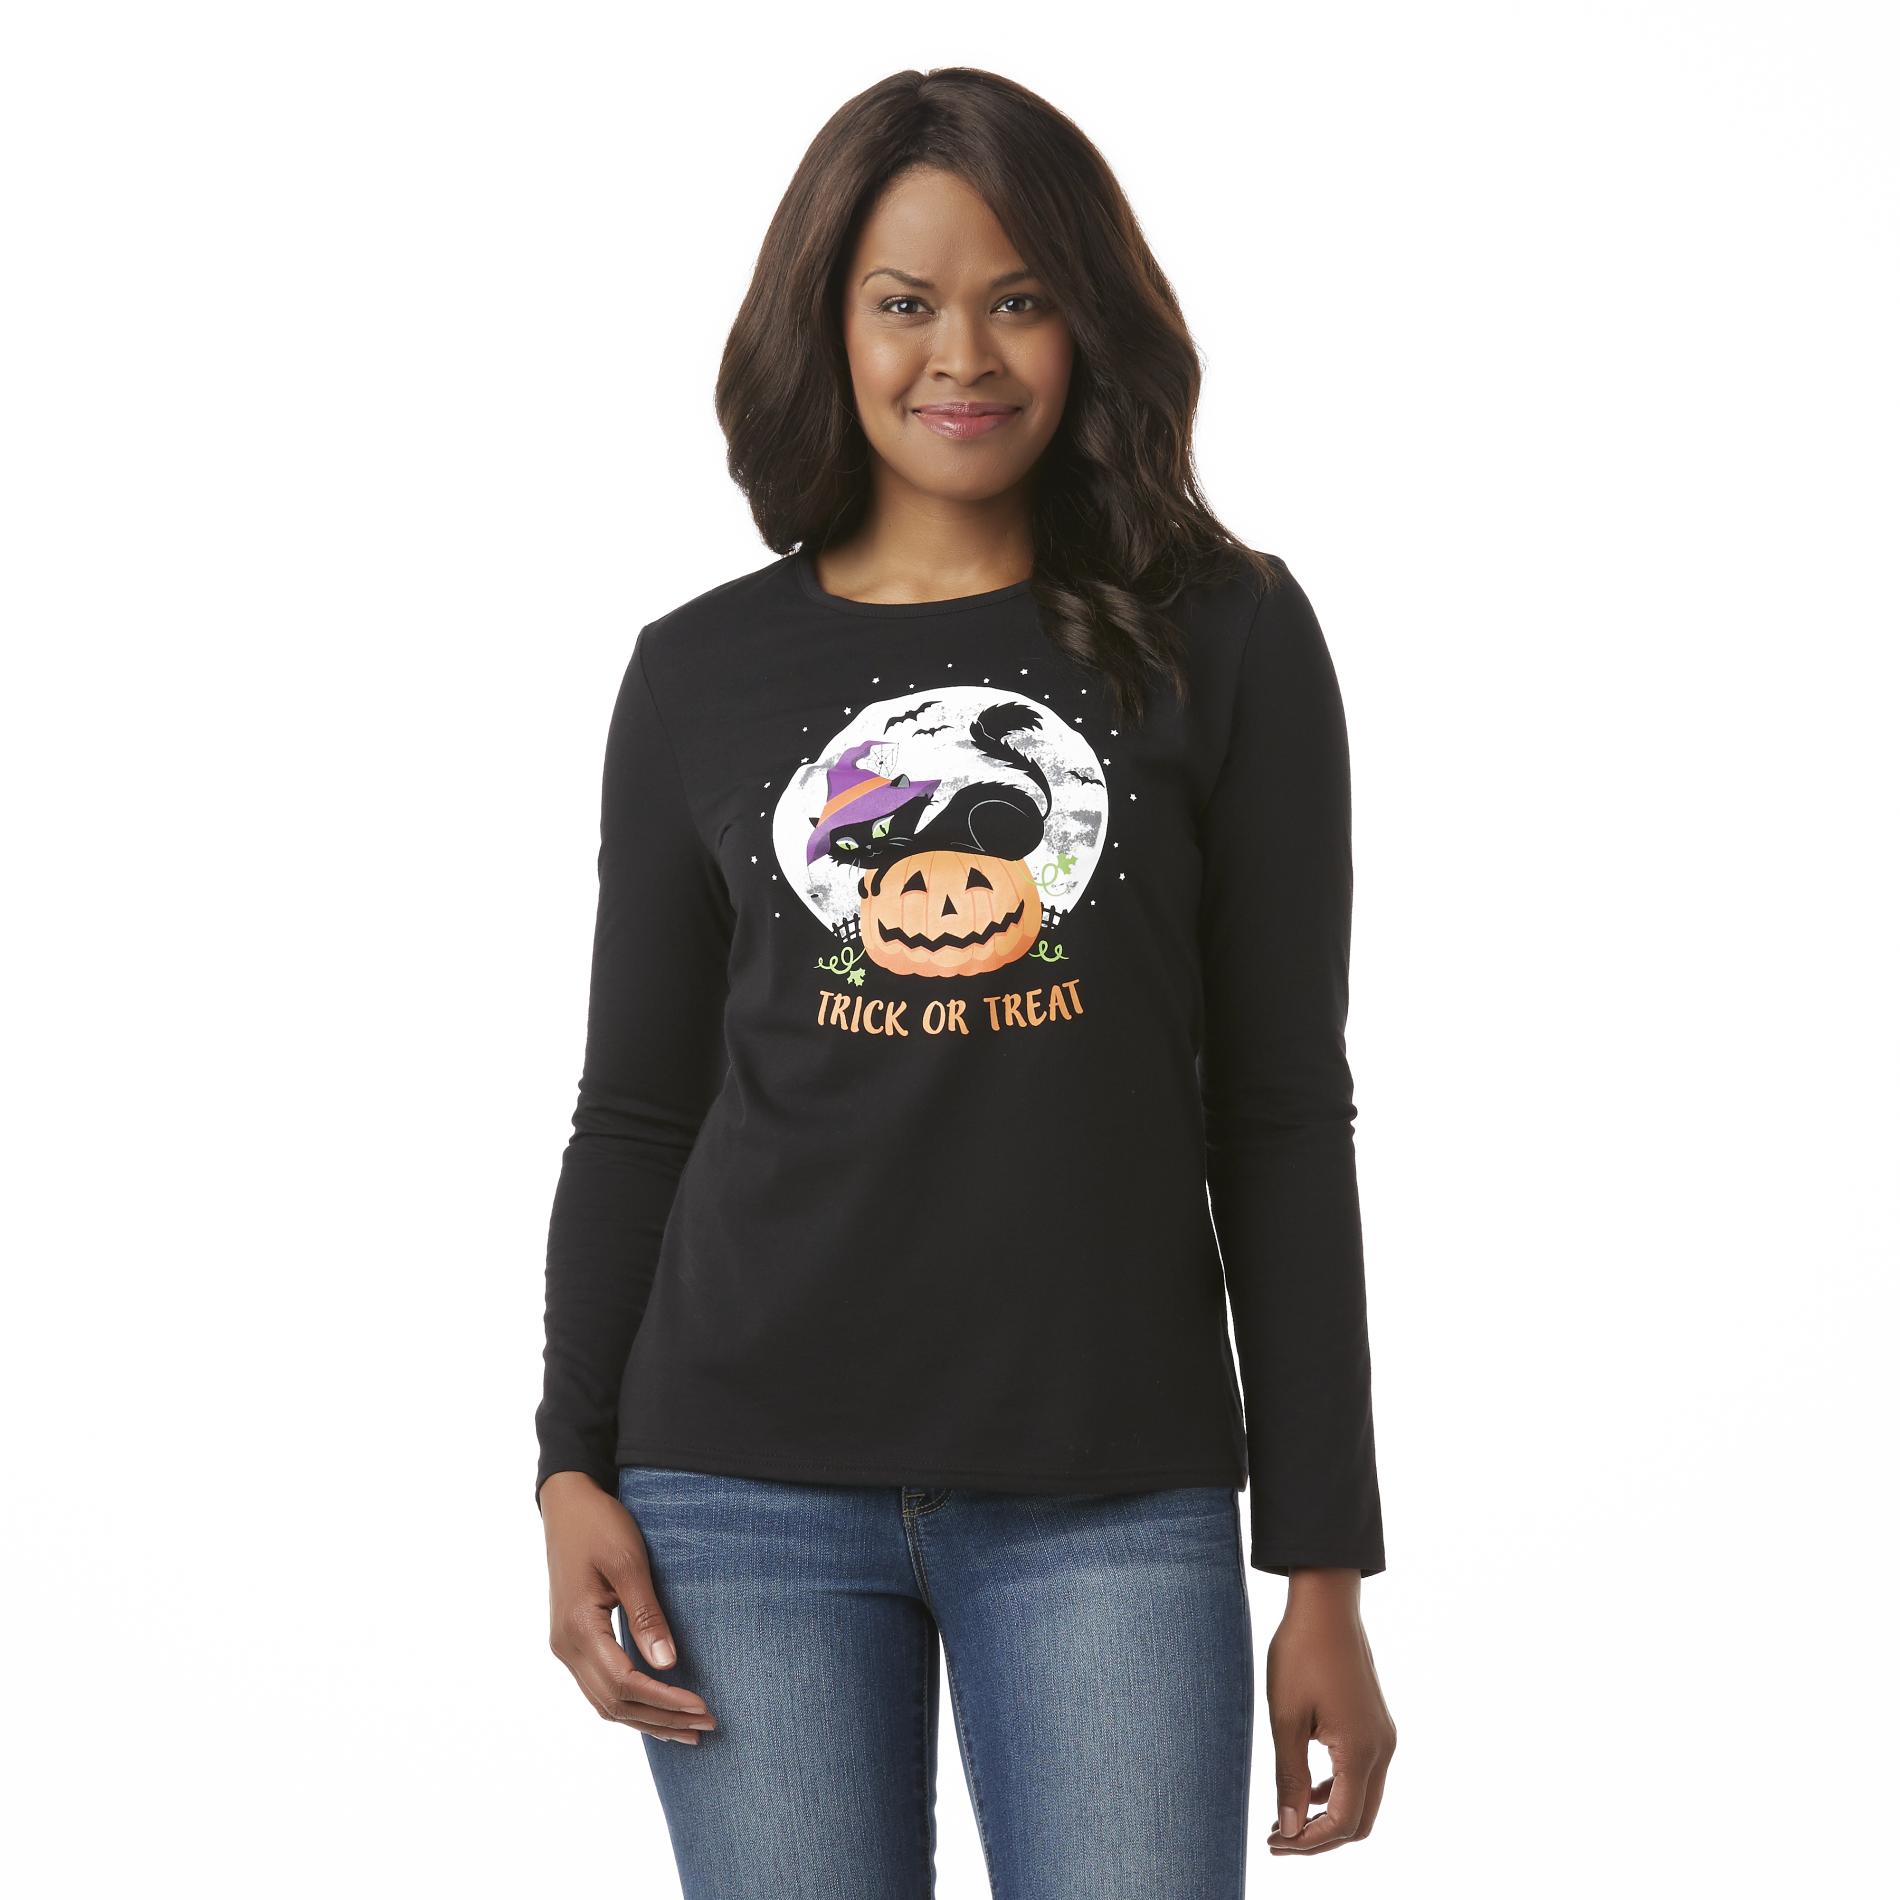 Holiday Editions Women's Halloween T-Shirt - Trick or Treat